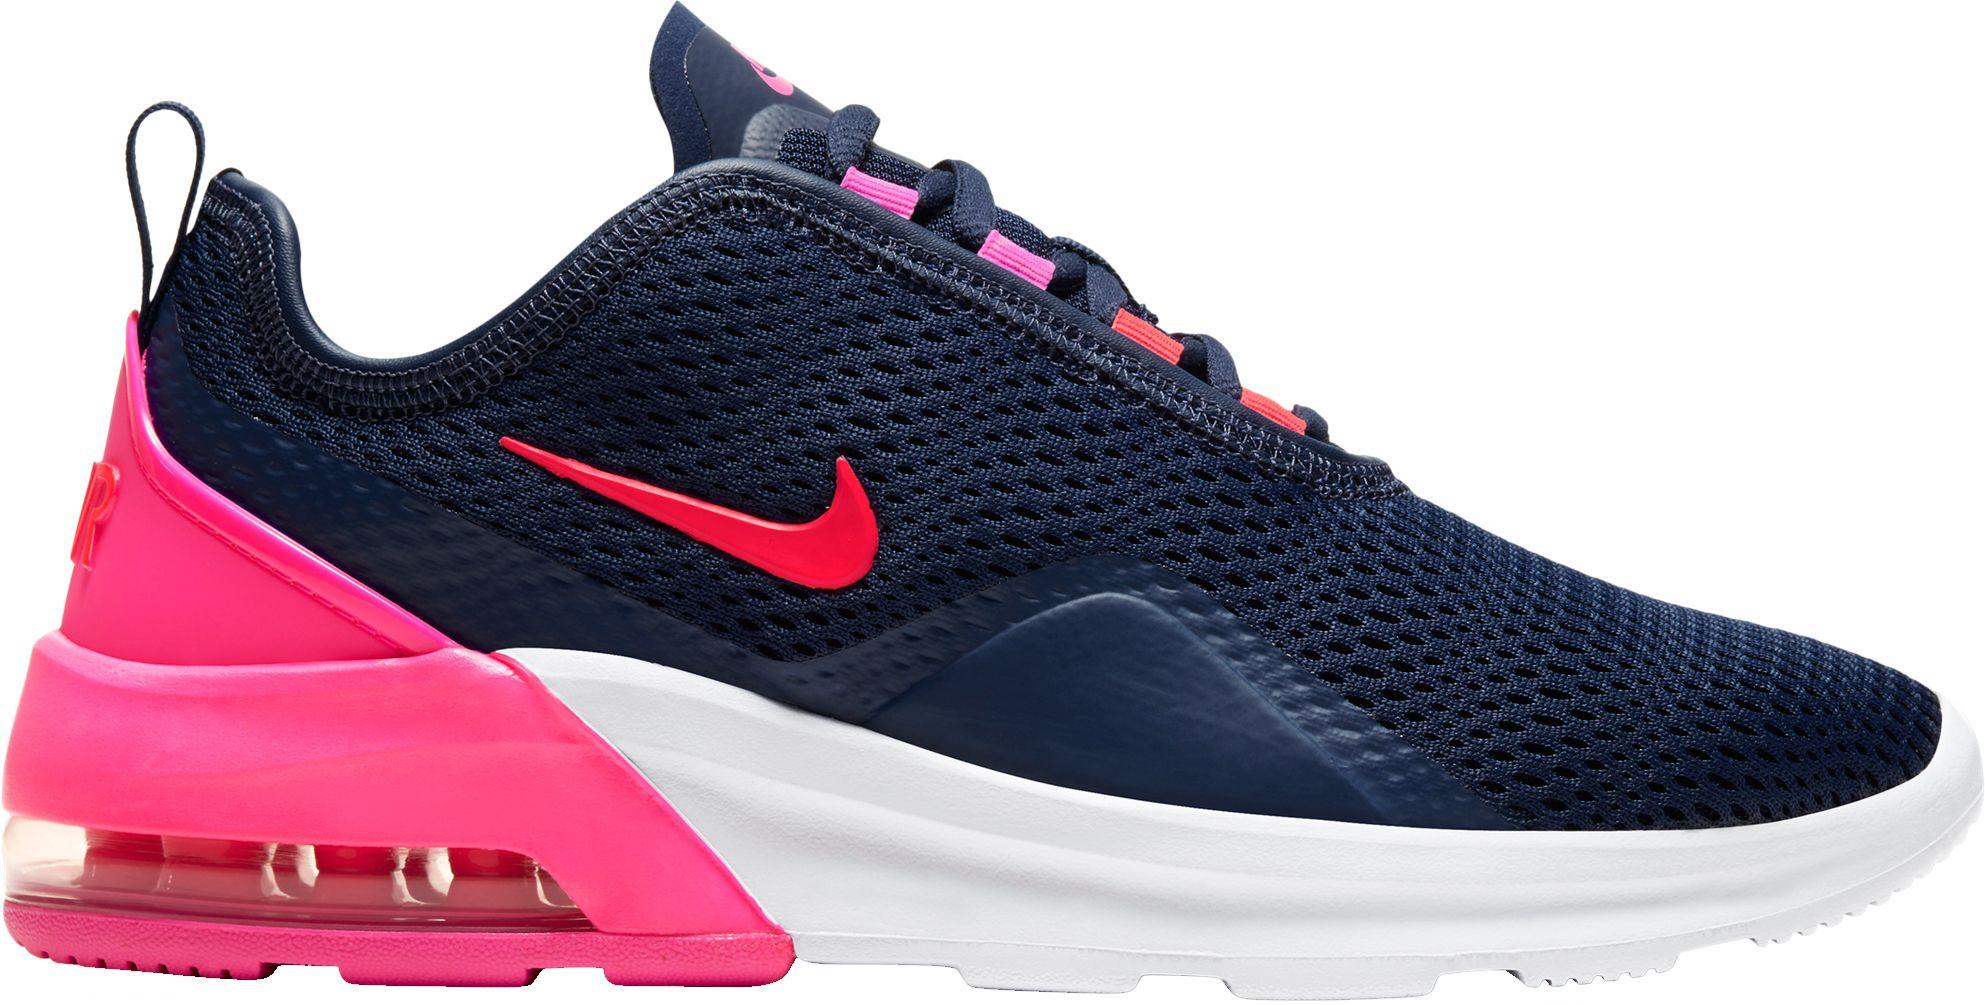 Nike Synthetic Air Max Motion 2 Shoes in Navy/Pink/White (Blue) - Lyst